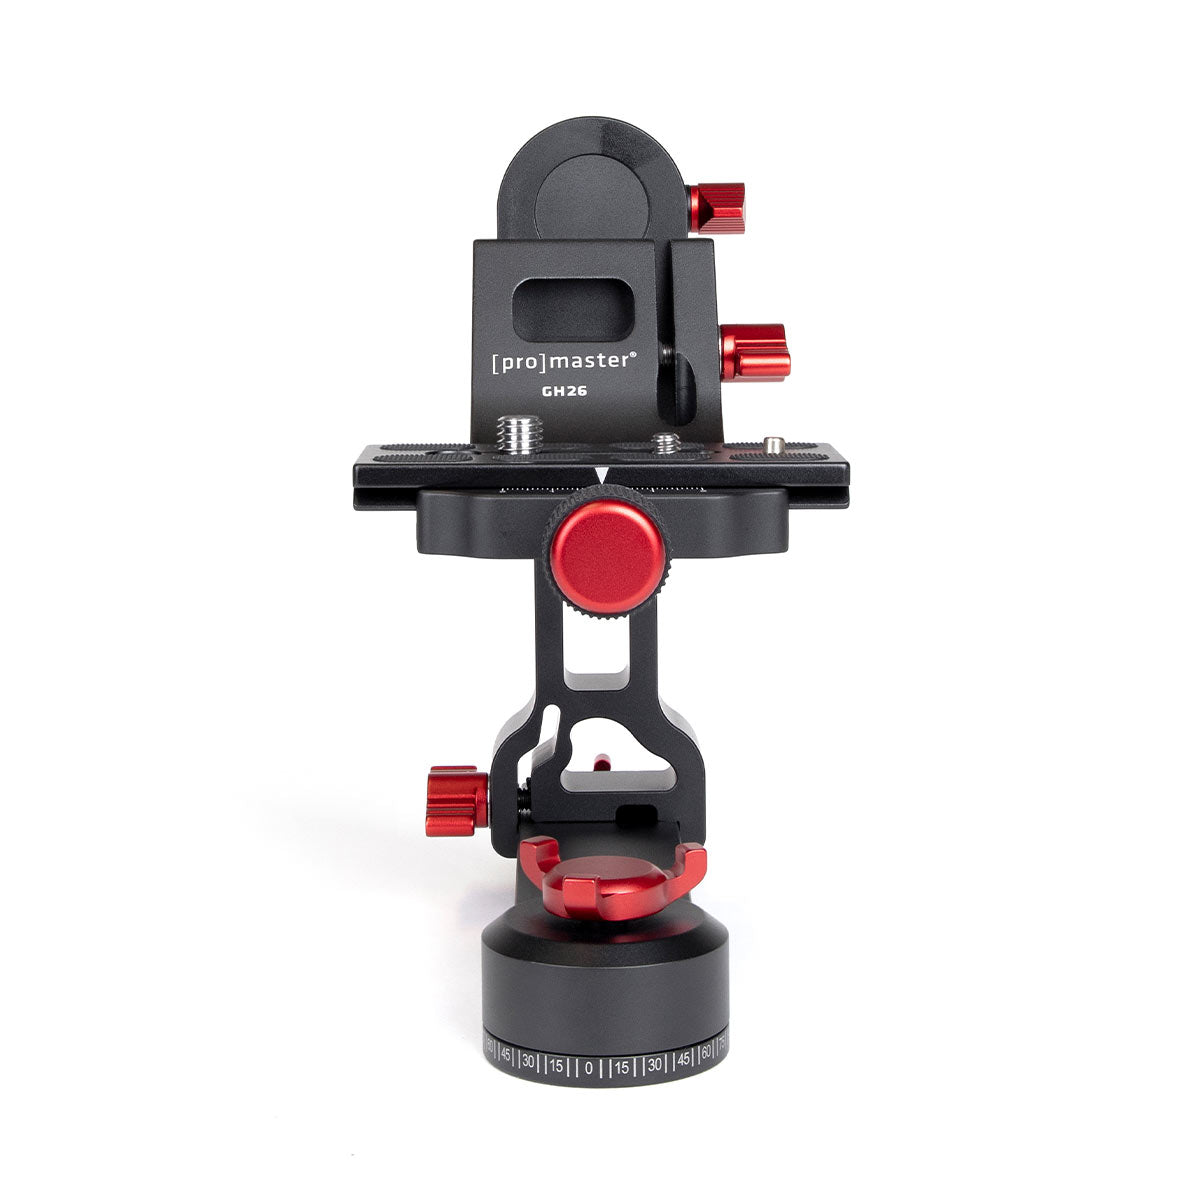 ProMaster GH26 Professional Gimbal Head